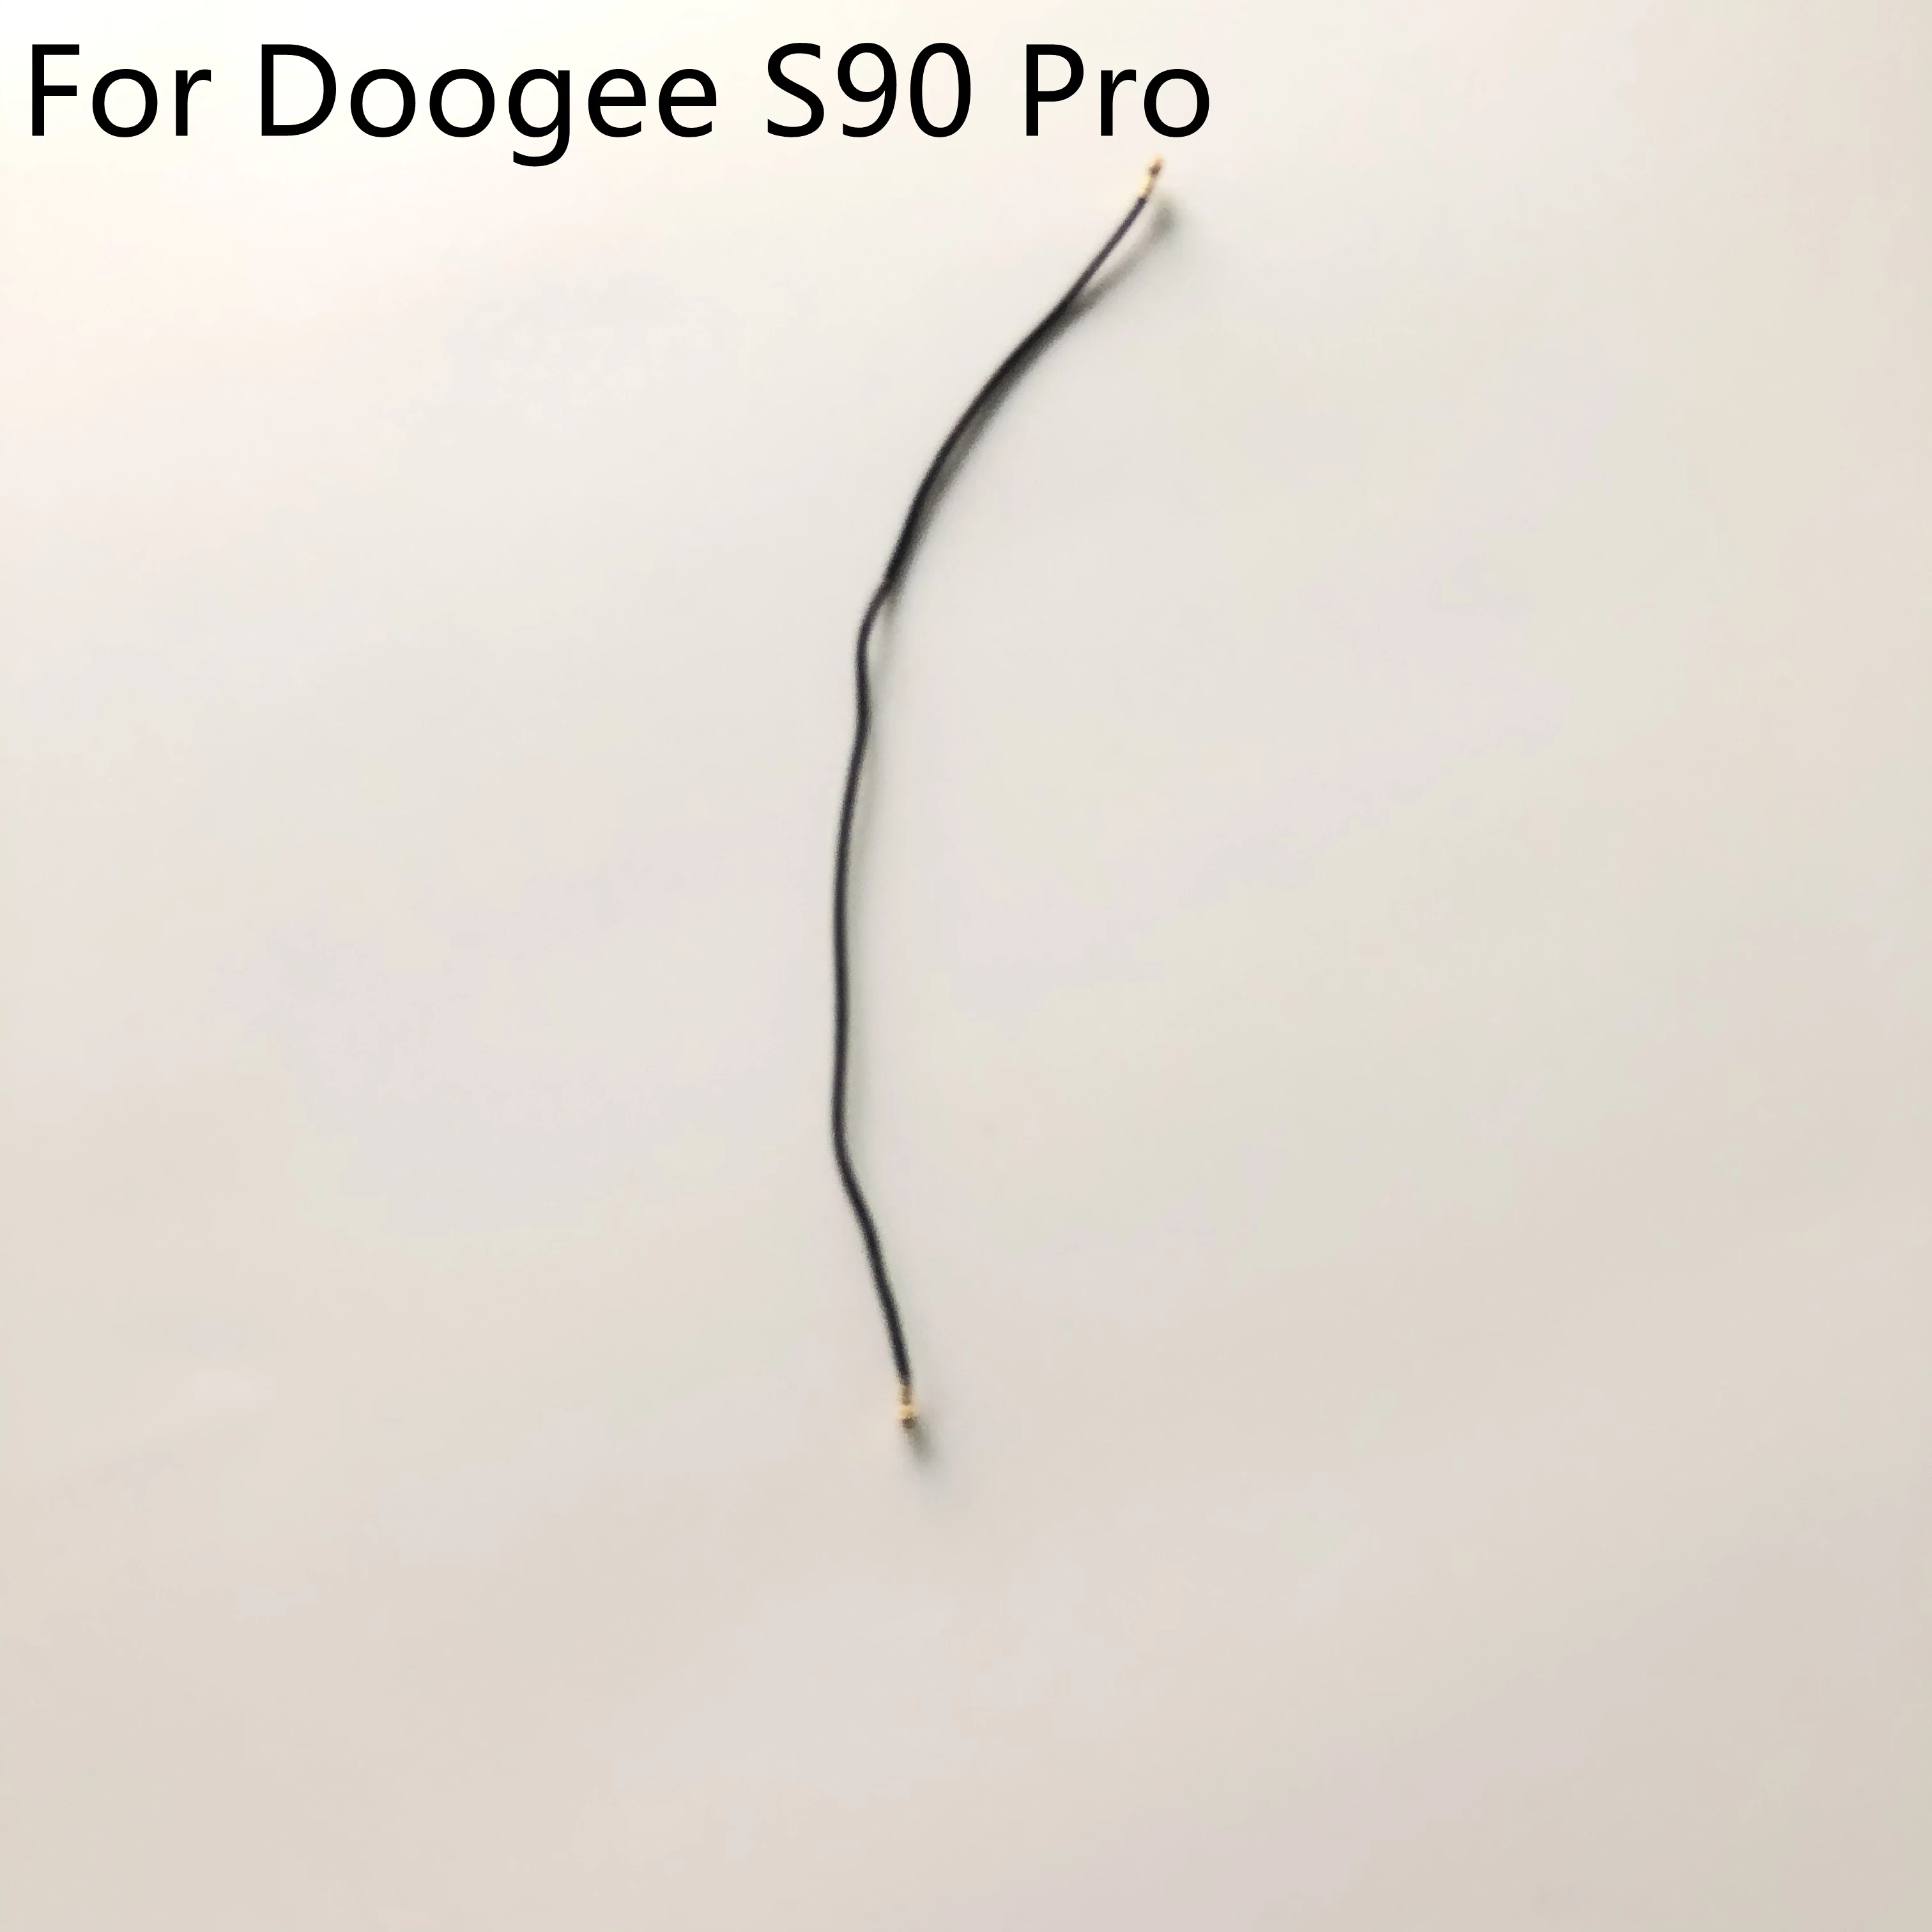 

DOOGEE S90 Pro Phone Coaxial Signal Cable For DOOGEE S90 Pro MT6771 Cortex 2246*1080 6.18" Smartphone